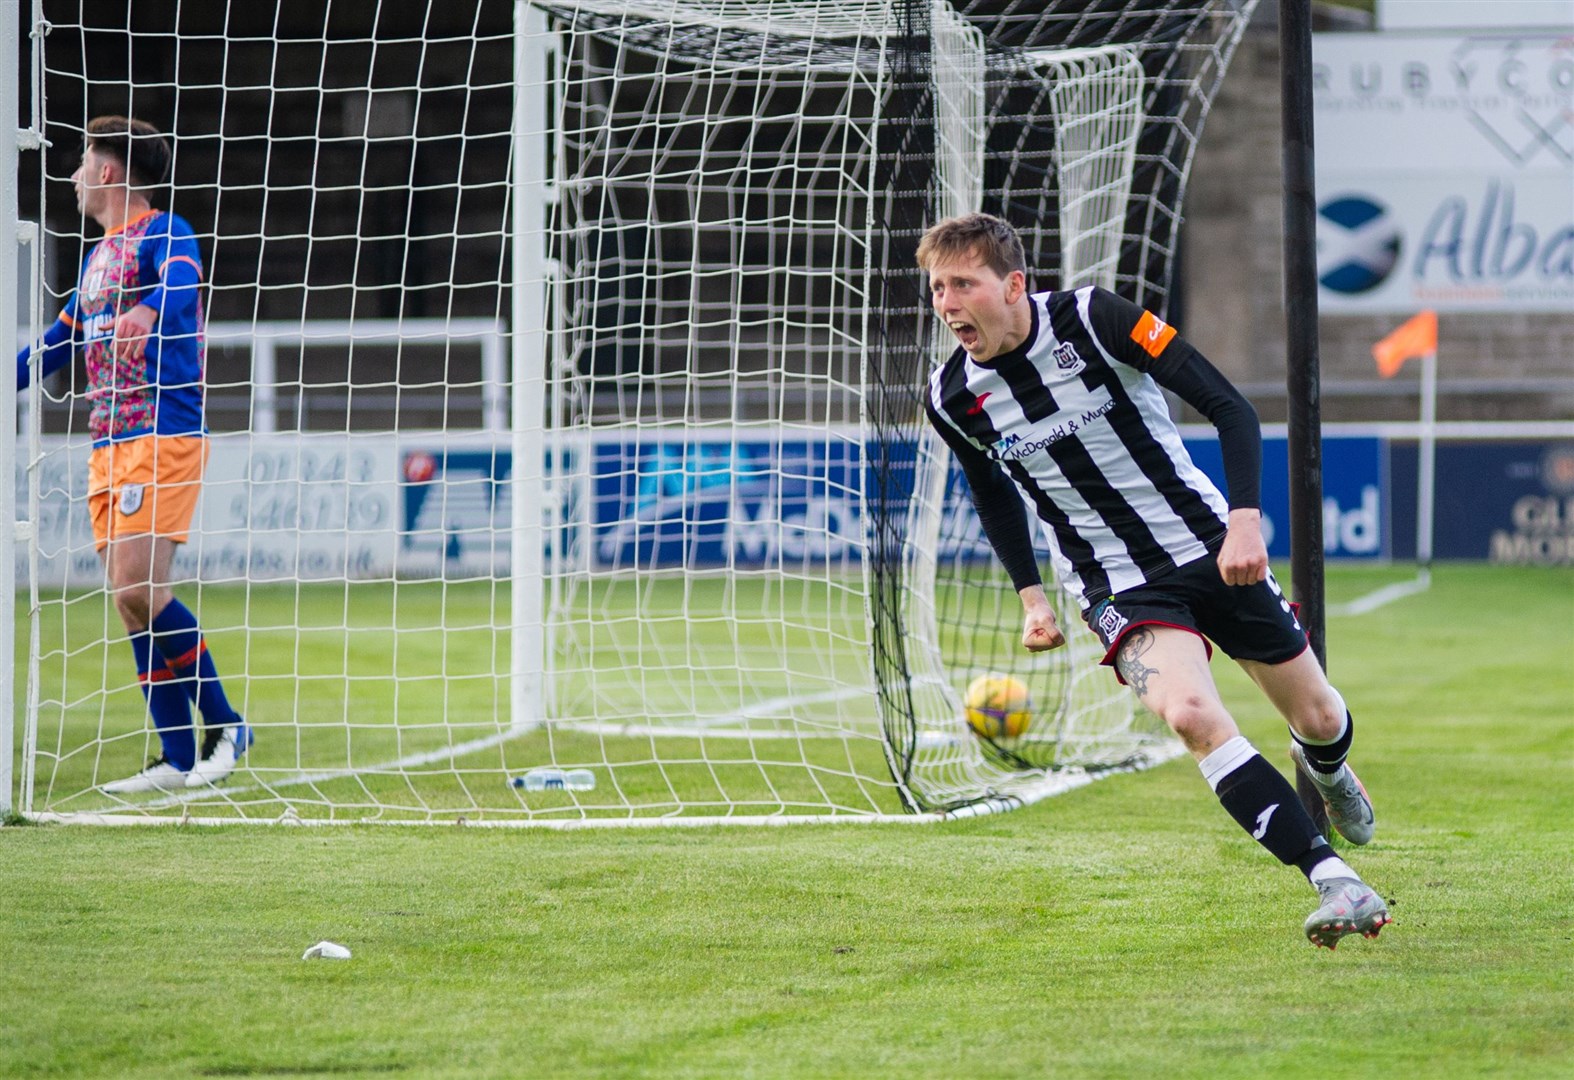 Kane Hester makes no mistake as he taps home after Brian Cameron's effort came off the bar. ..Elgin City FC (3) vs Queen's Park FC (2) - Scottish League Two - Borough Briggs, Elgin 04/05/2021...Picture: Daniel Forsyth..